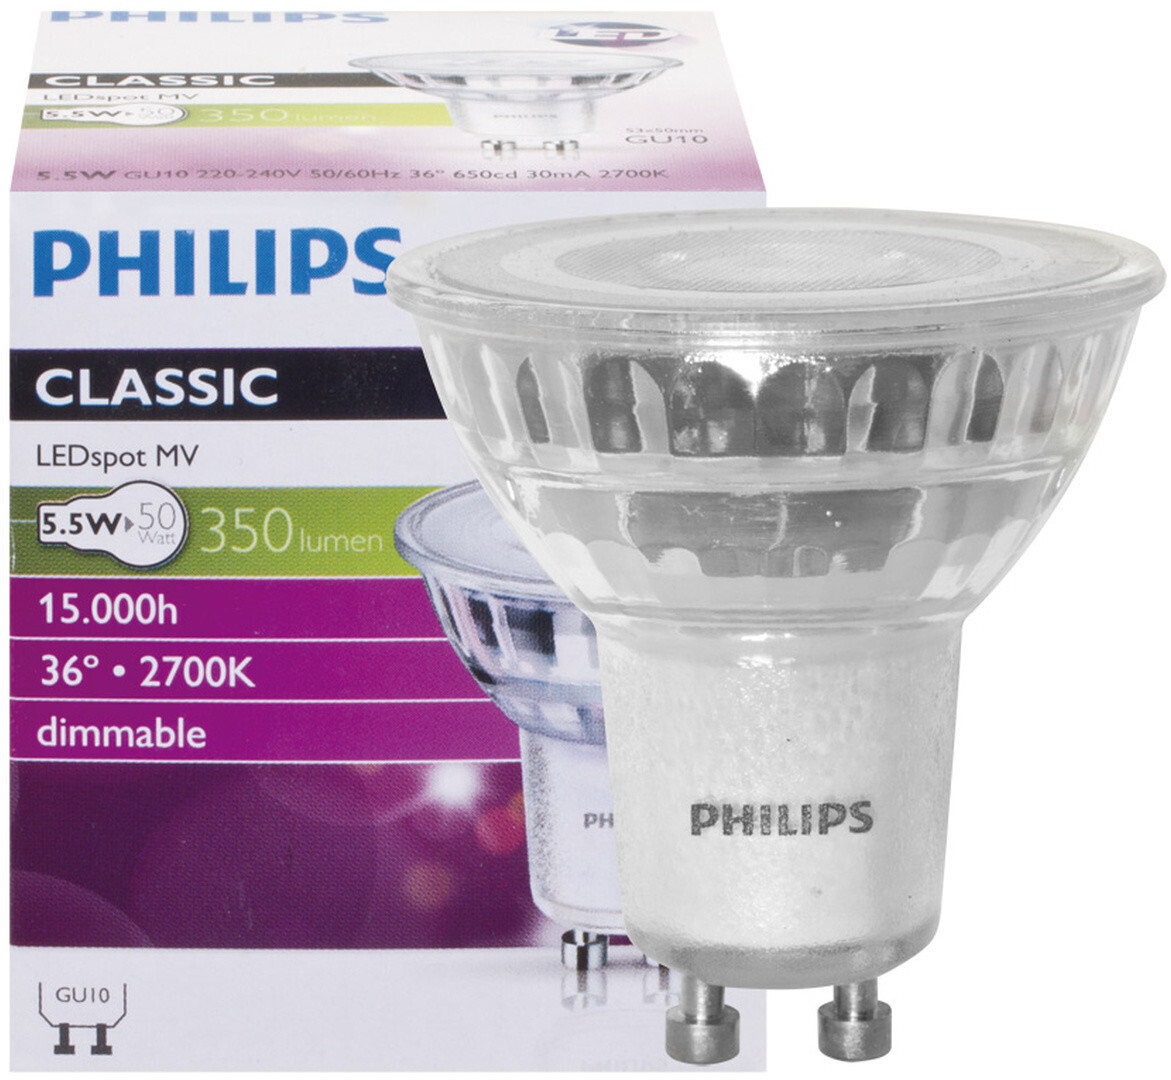 PHILIPS COREPRO LED GU10 5W 36D DIMMABLE 3000K